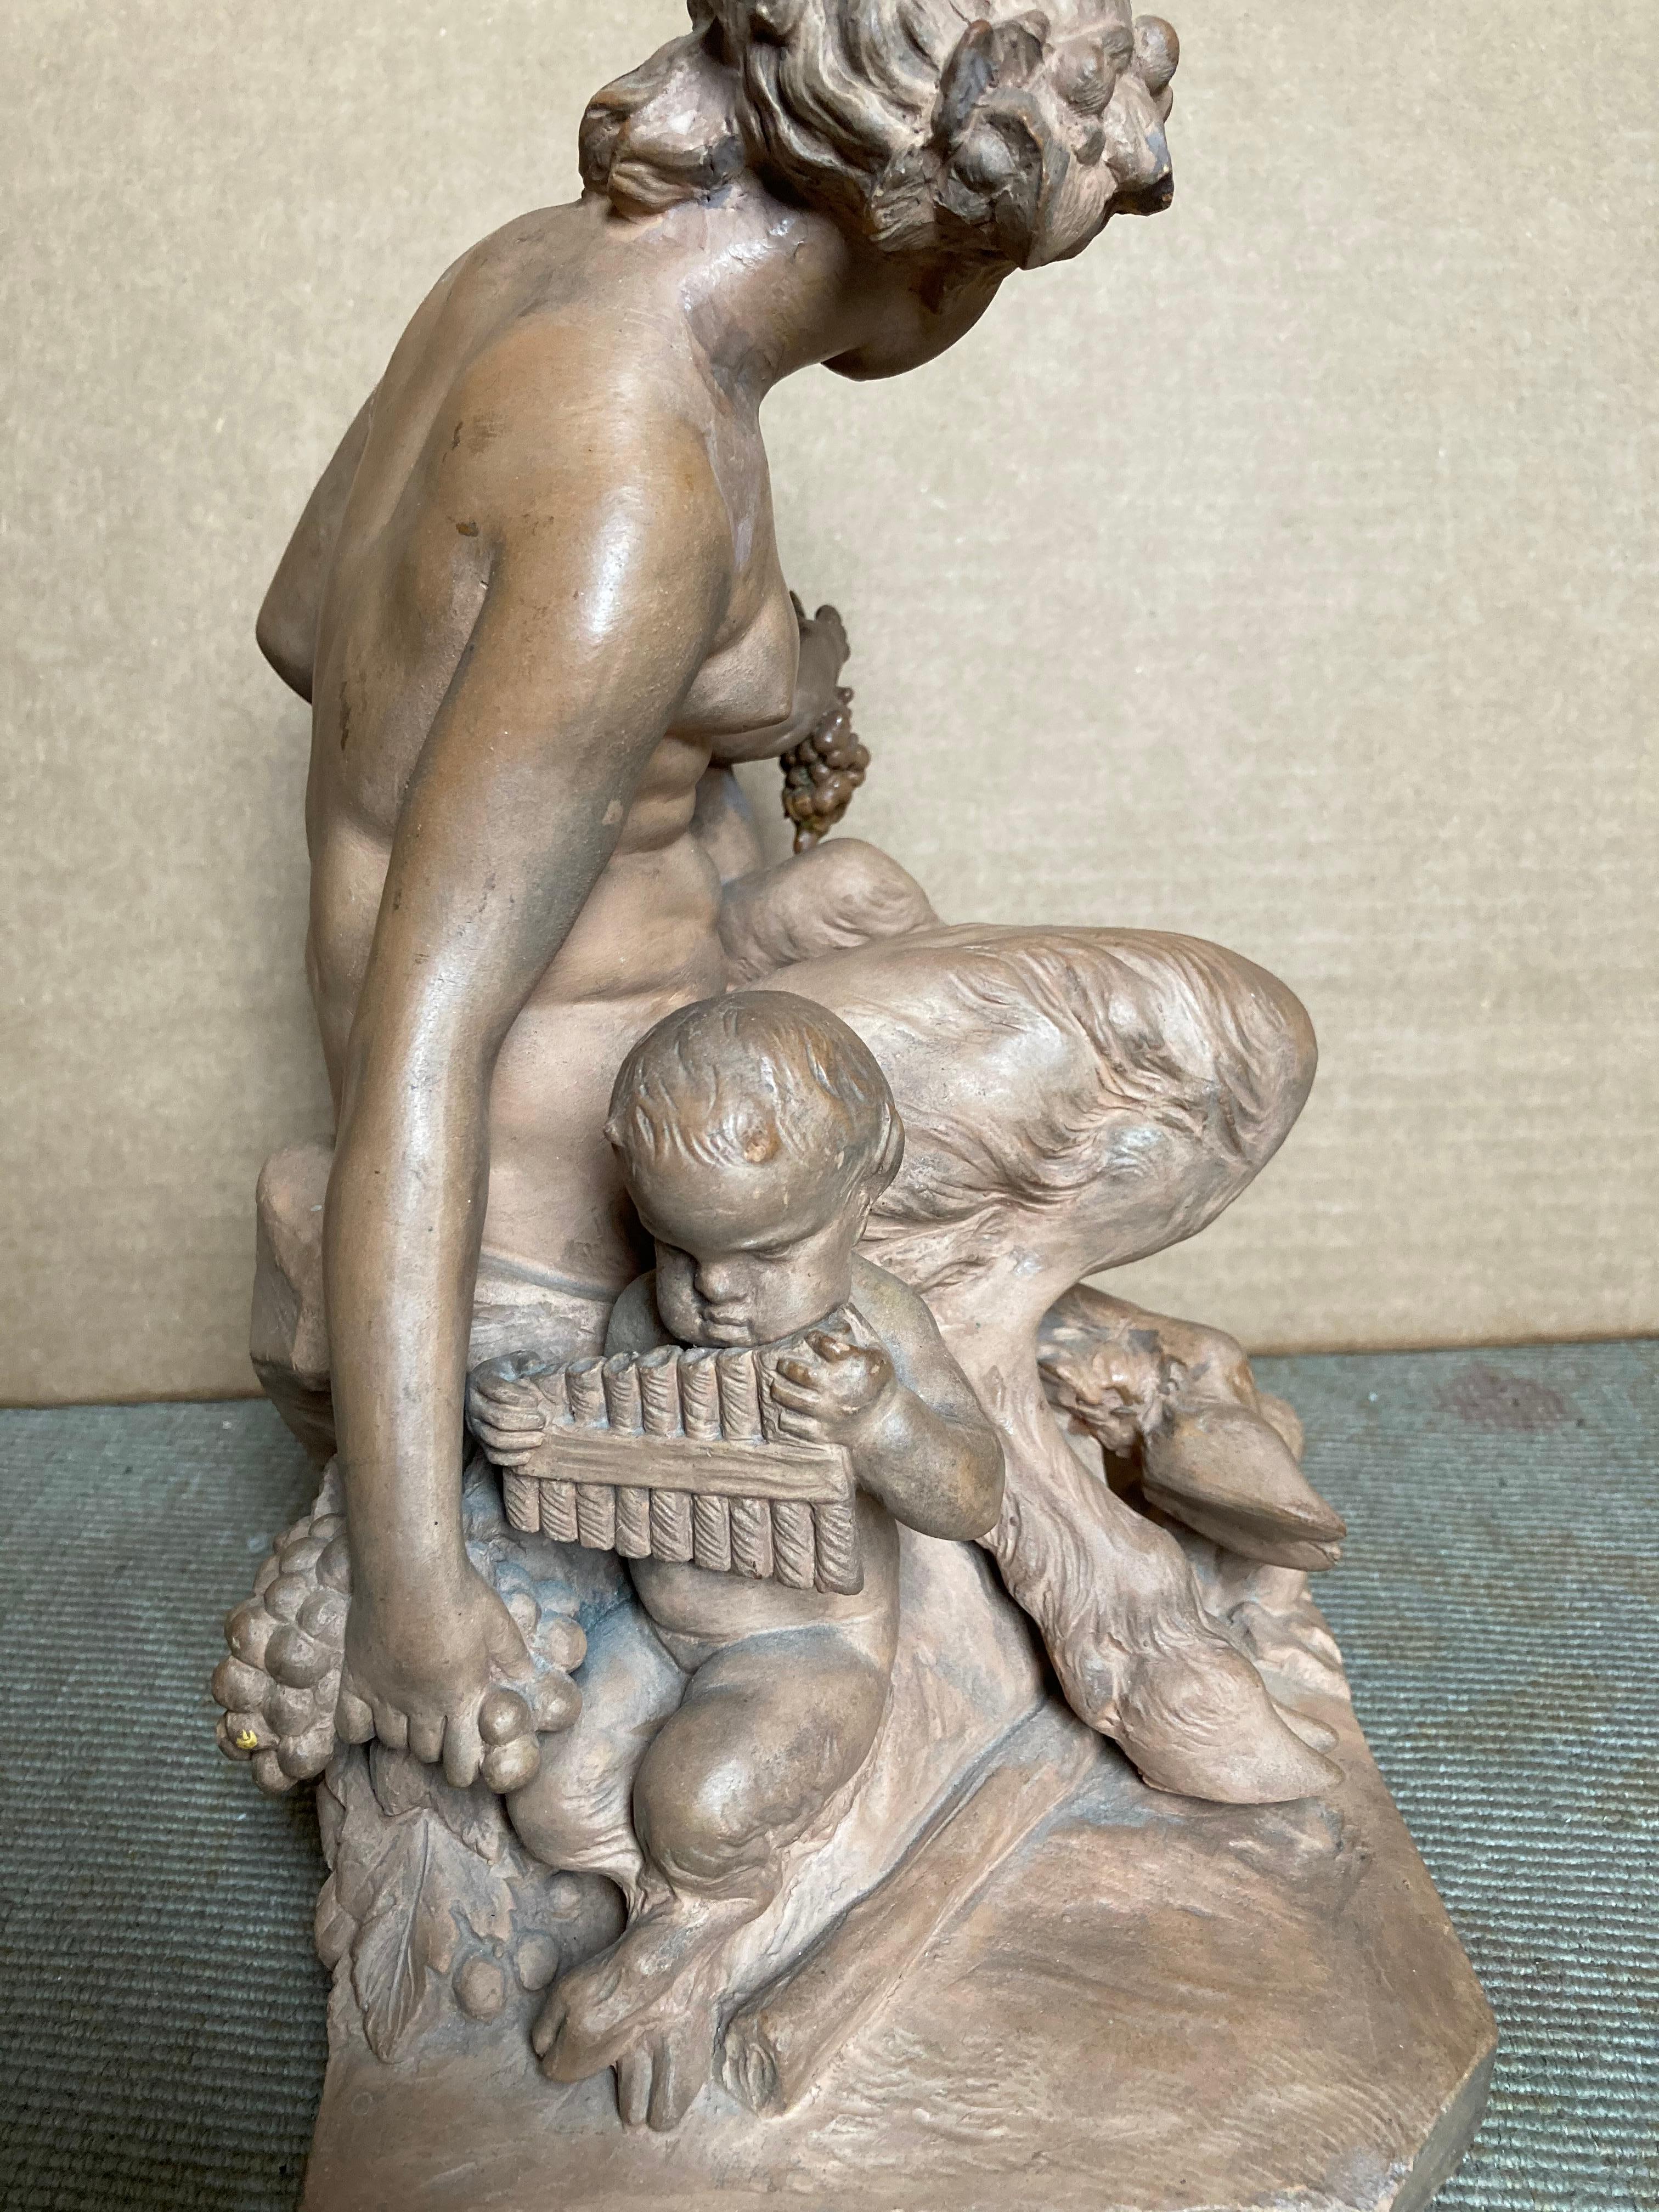 Satyress and her Children - Brown Figurative Sculpture by Levy